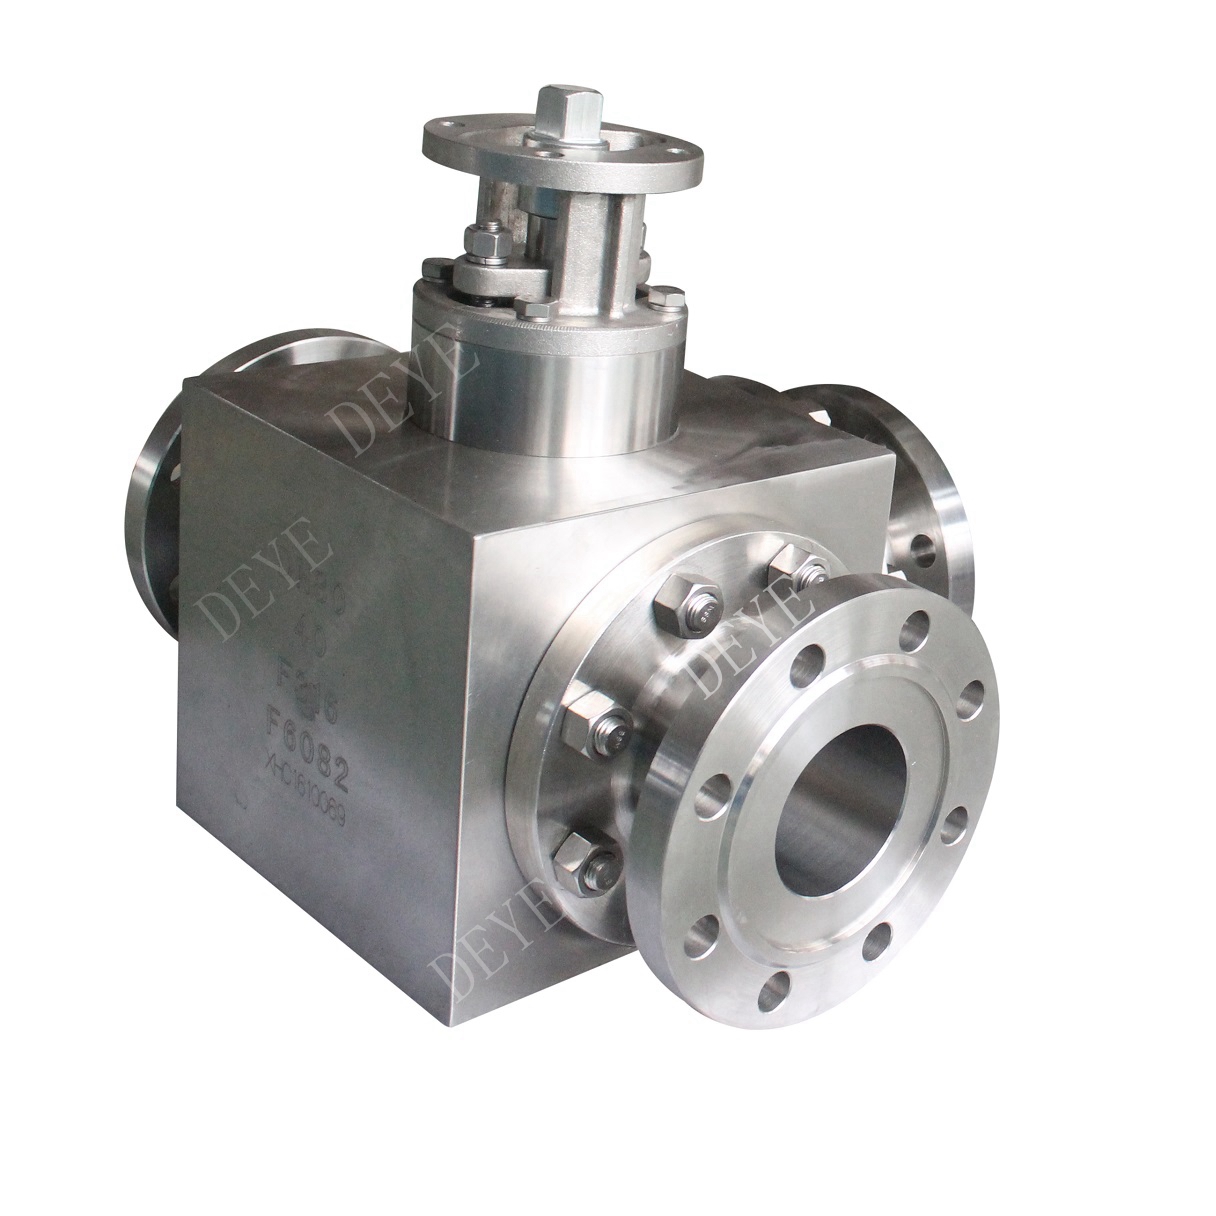 Hot sale Cs Ball Valve -
  300LBS stainless steel 3-way ball valve with Flanged ends  BV-300-3WYF – Deye